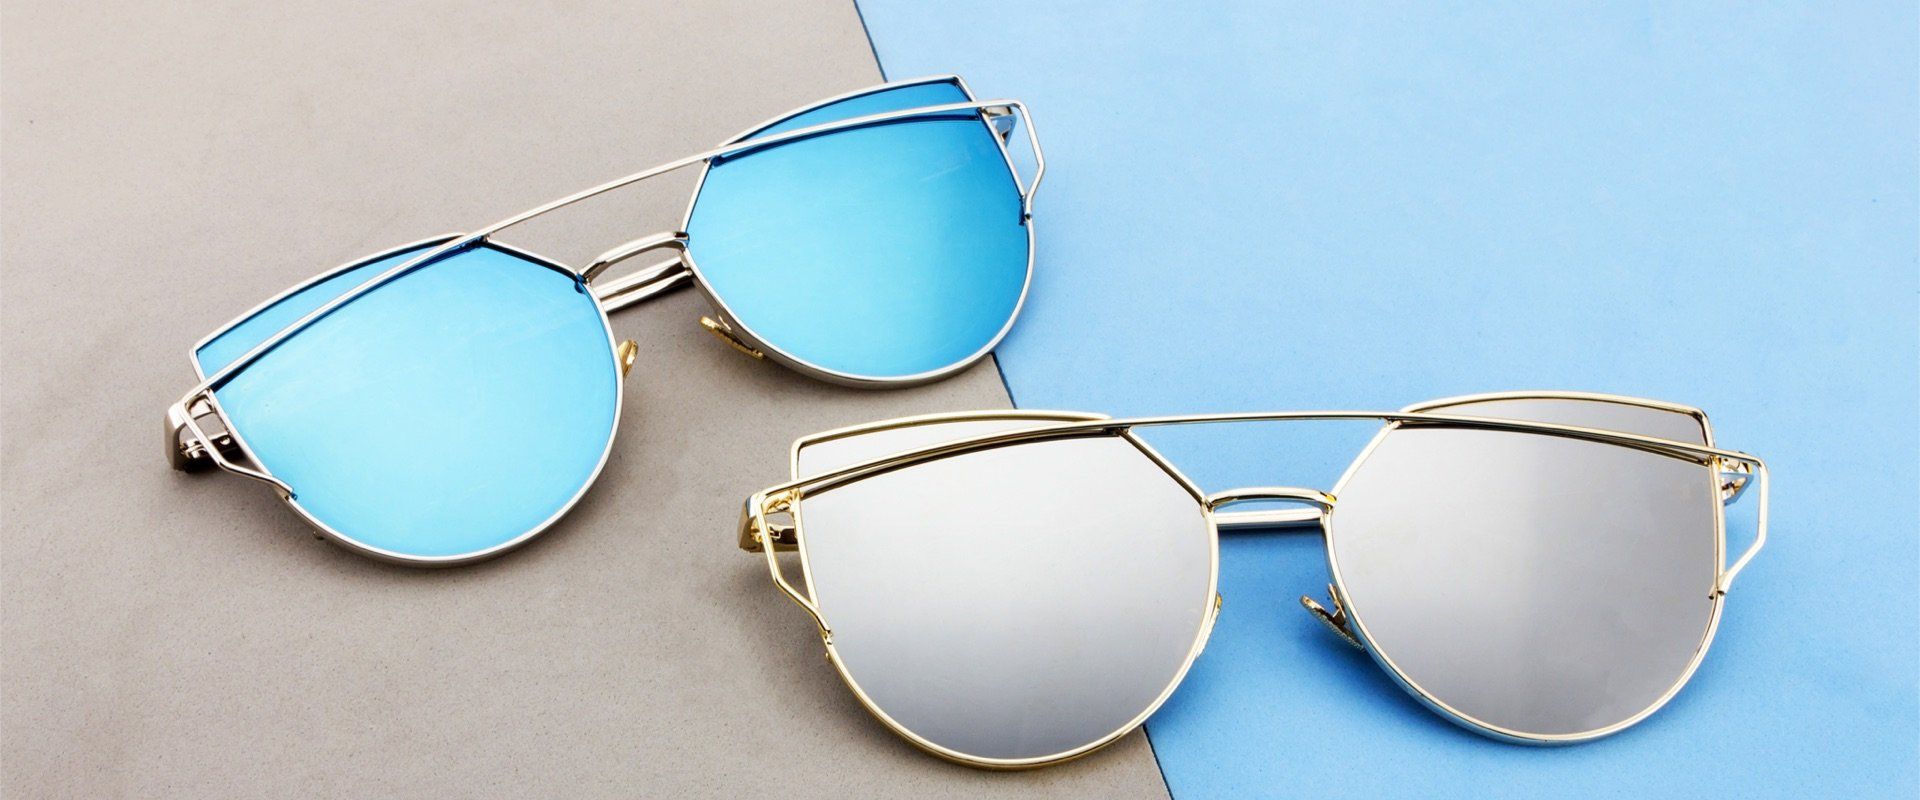 Two pair of sunglasses.One with blue lenses, one with gray lenses